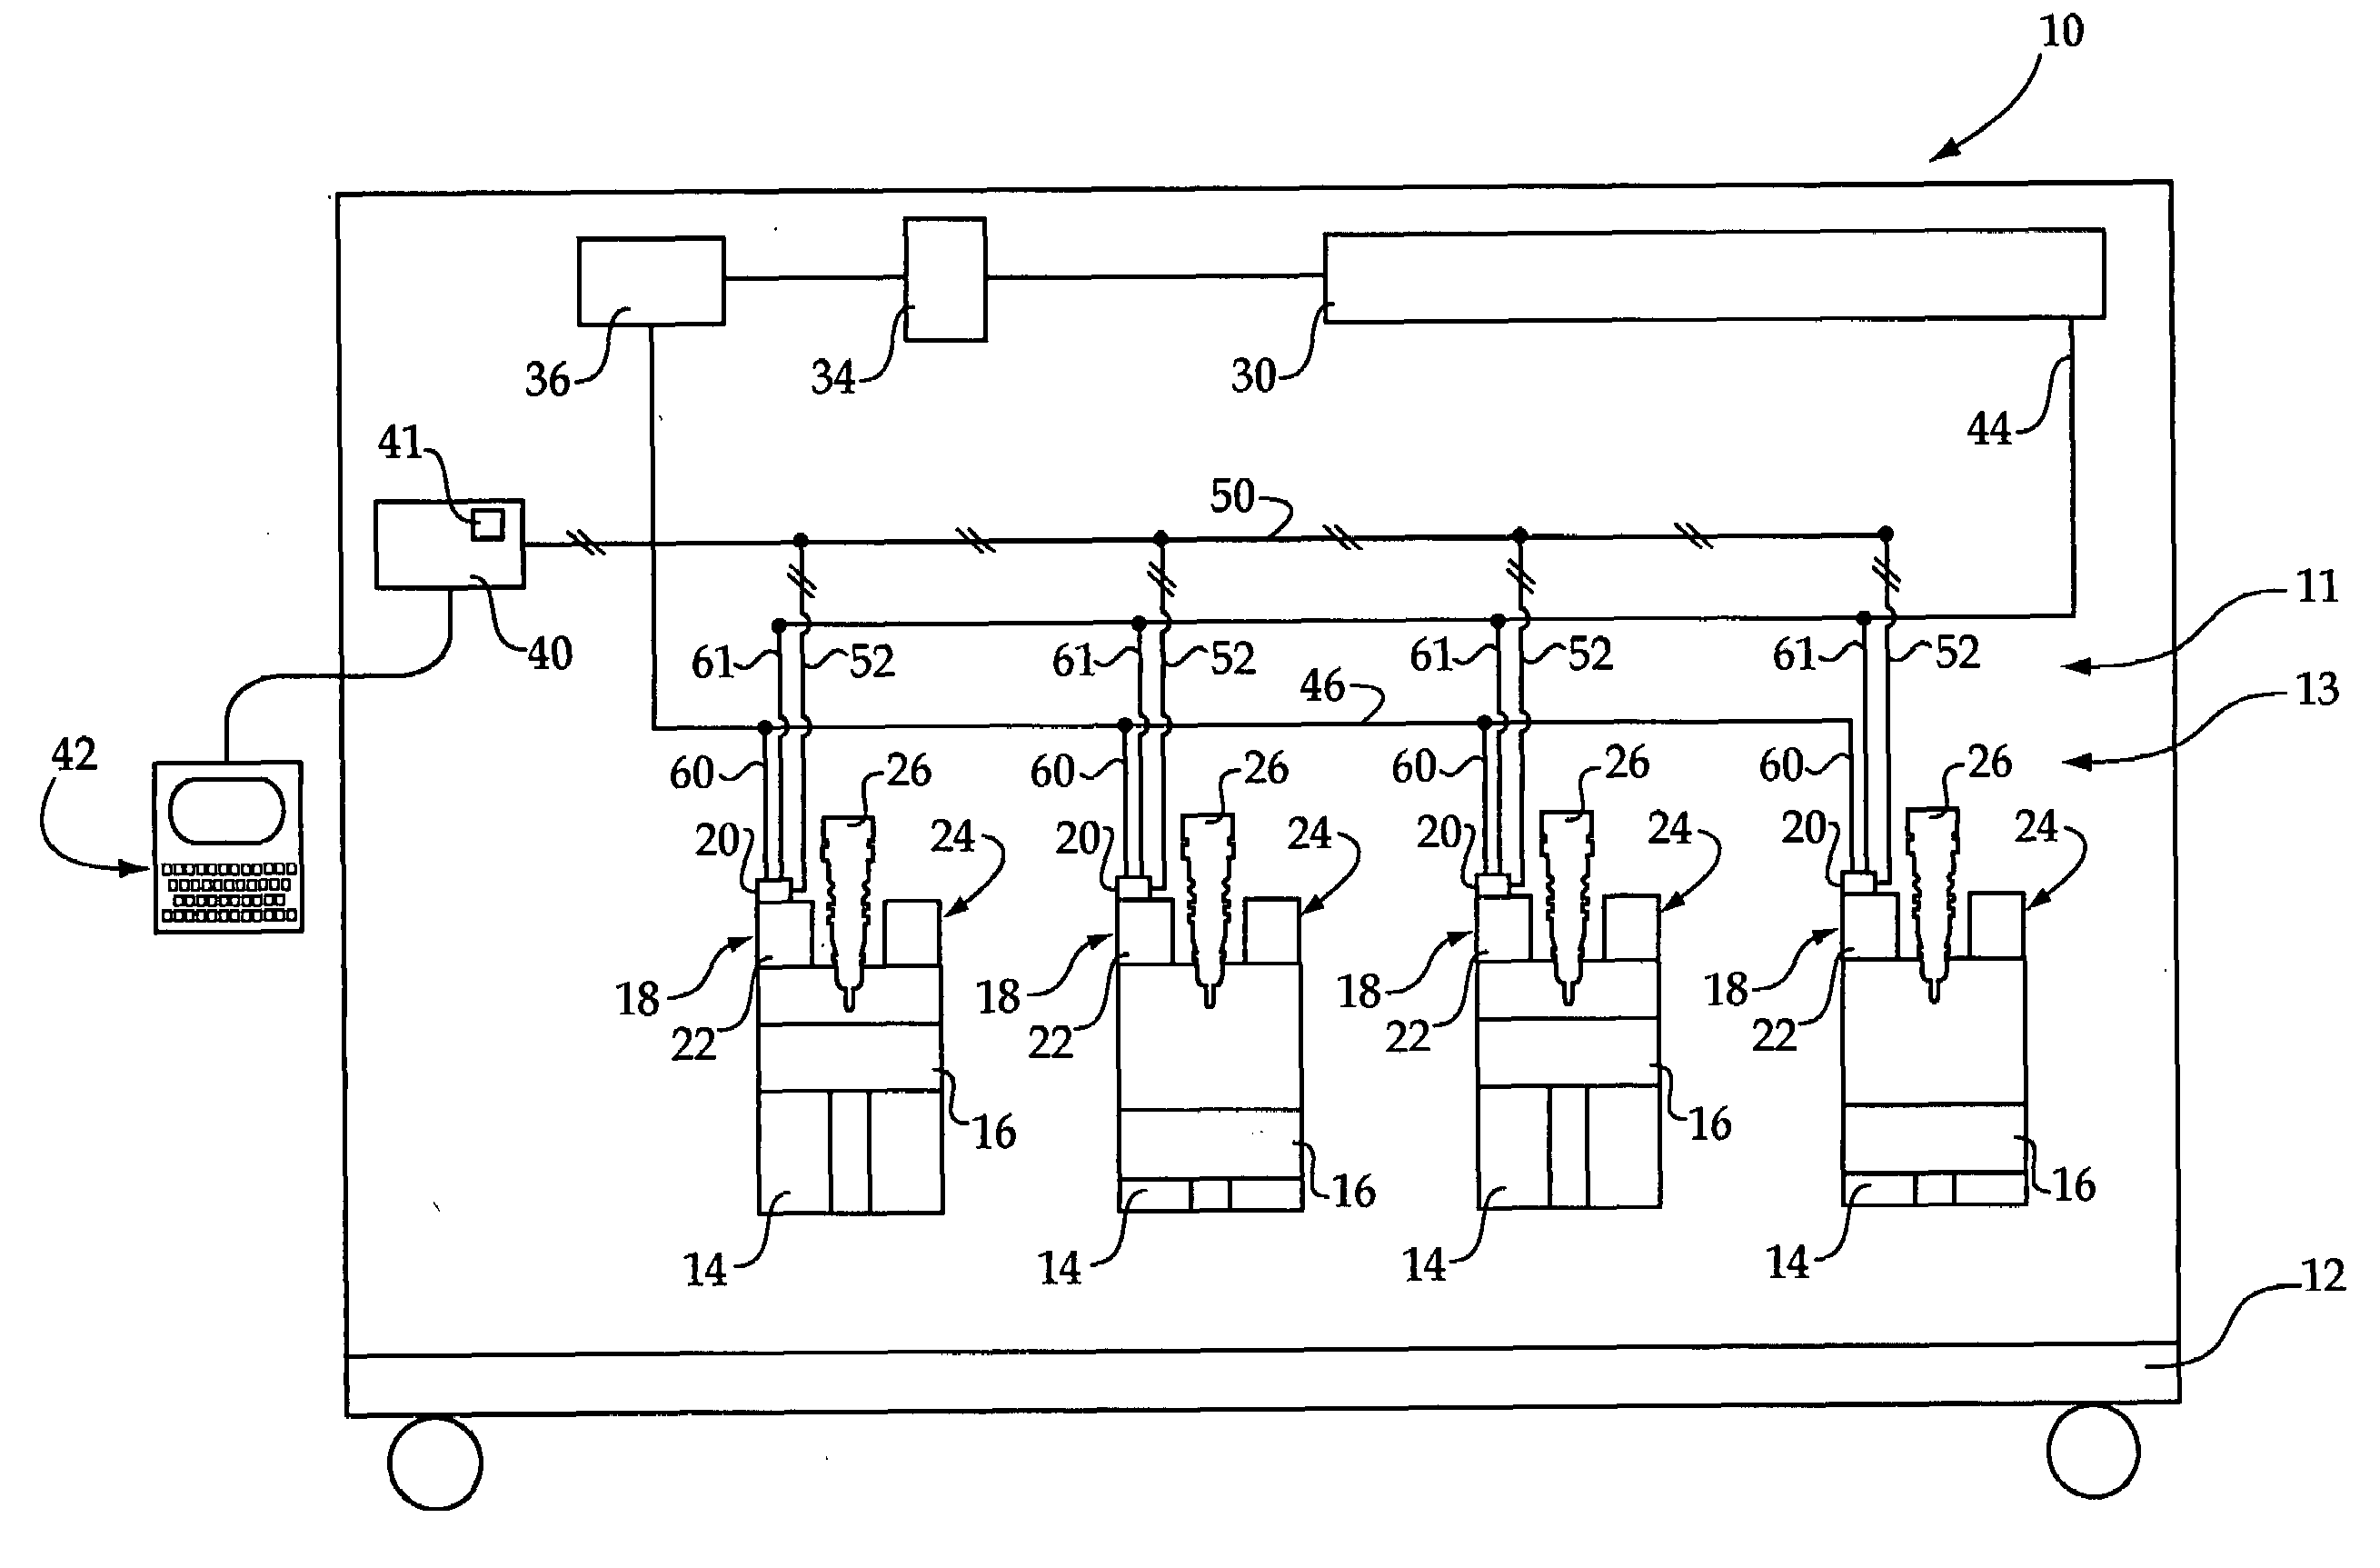 Valve performing detection and modification strategy for internal combustion engine